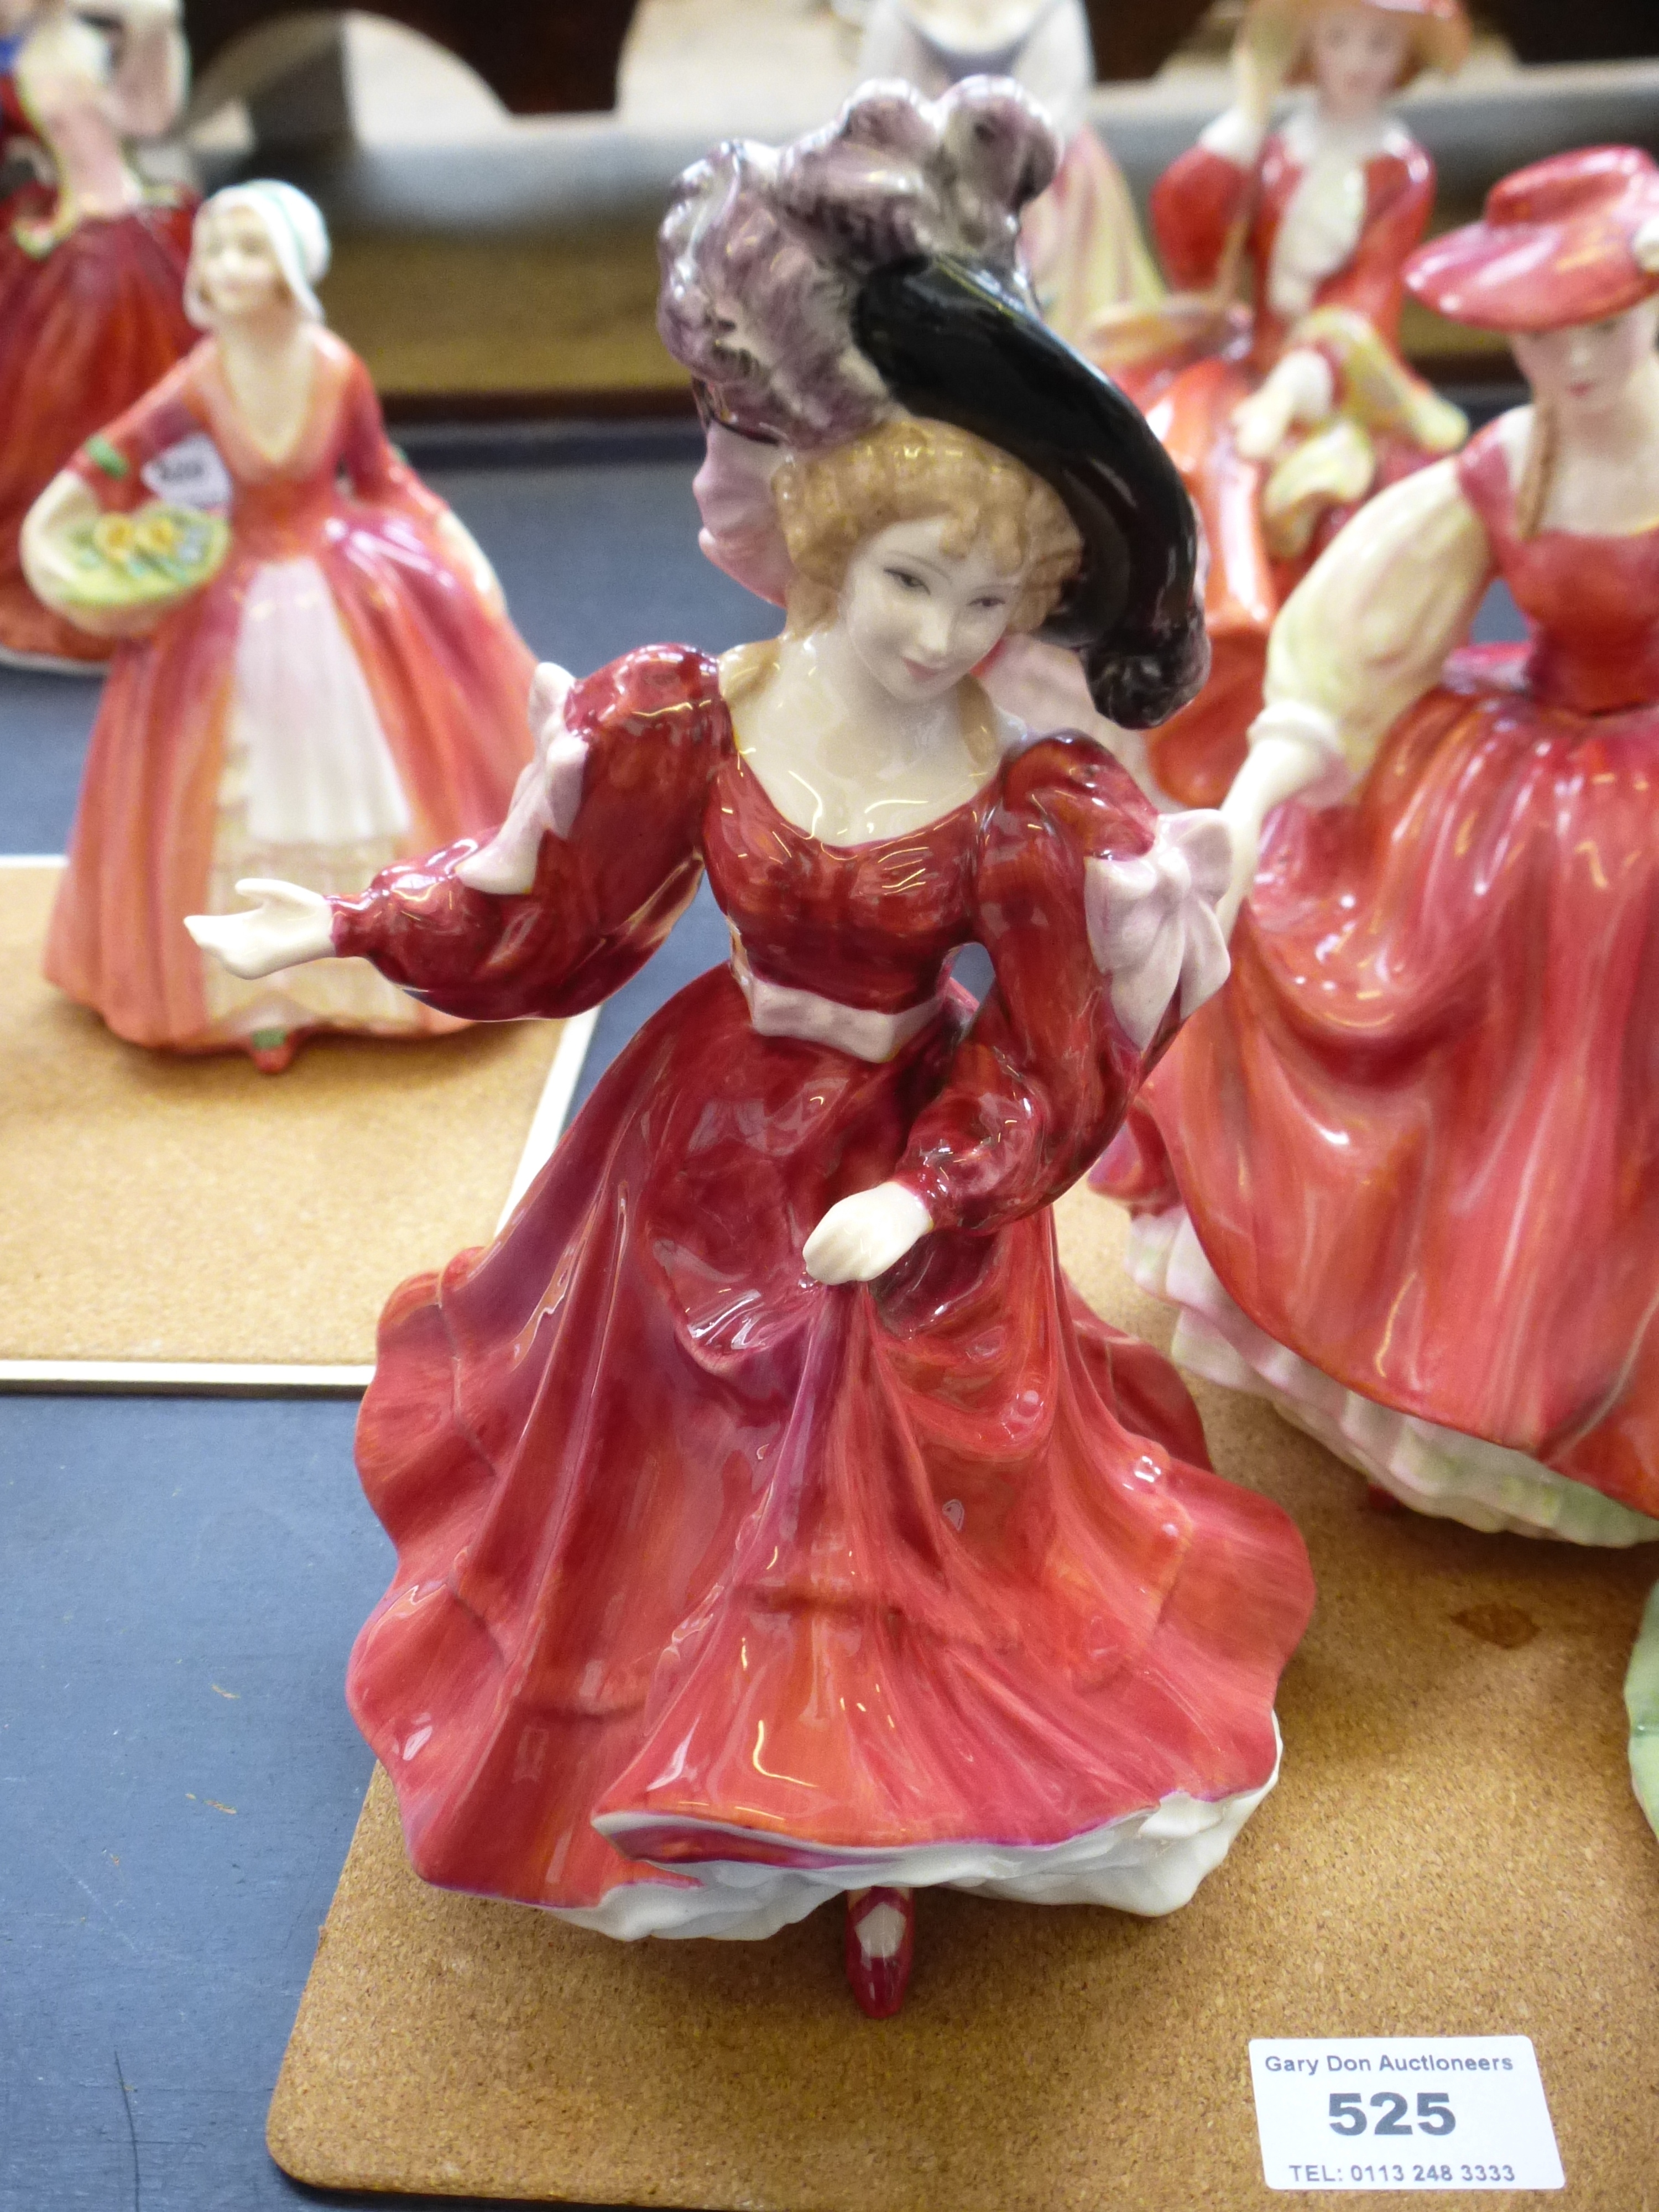 3 ROYAL DOULTON FIGURES - BUTTERCUP HN 2399, WINTERTIME HN 3622 AND FIGURE OF THE YEAR PATRICIA HN - Image 3 of 7